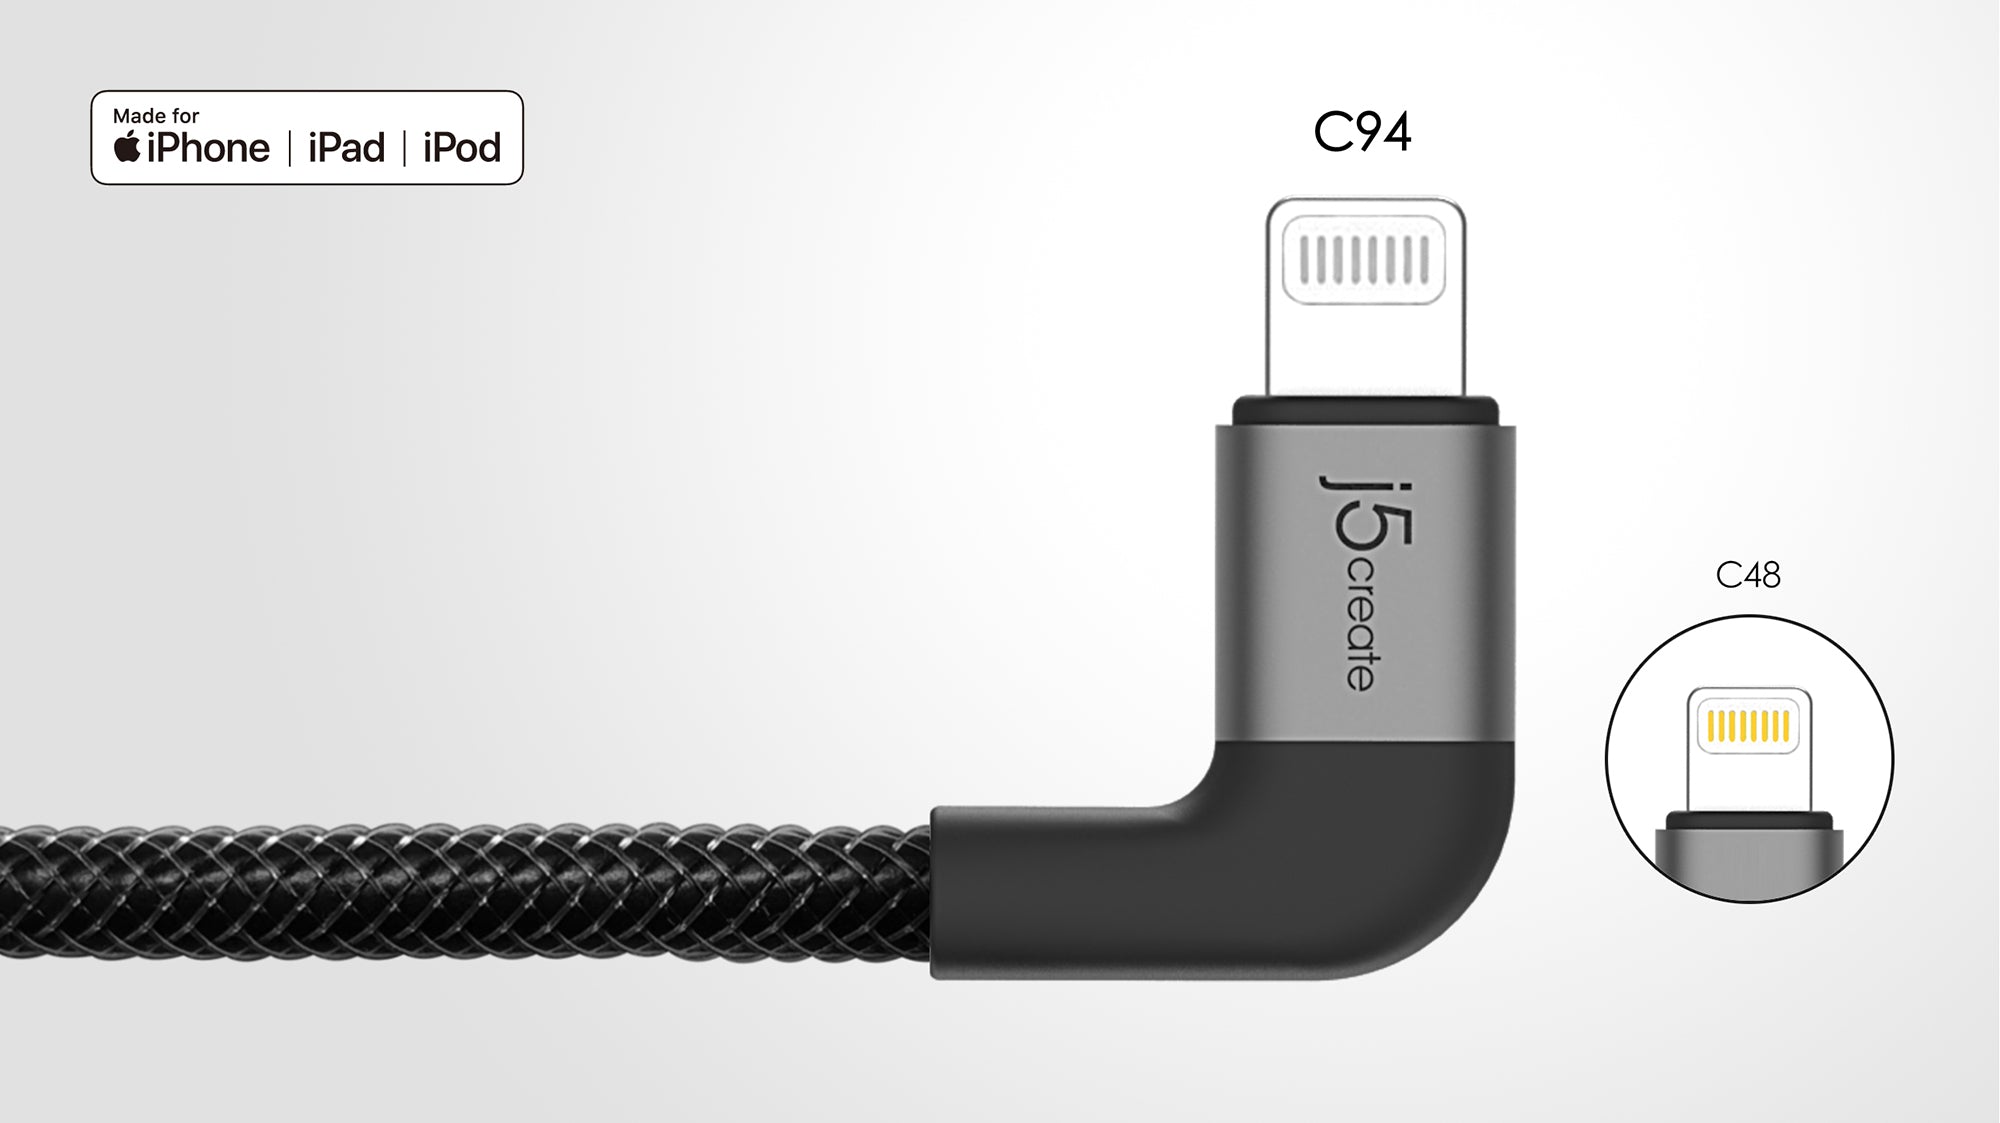 CABLE LIGHTNING IPHONE TO USB TIPO C 5A. CARGA RAPIDA JET